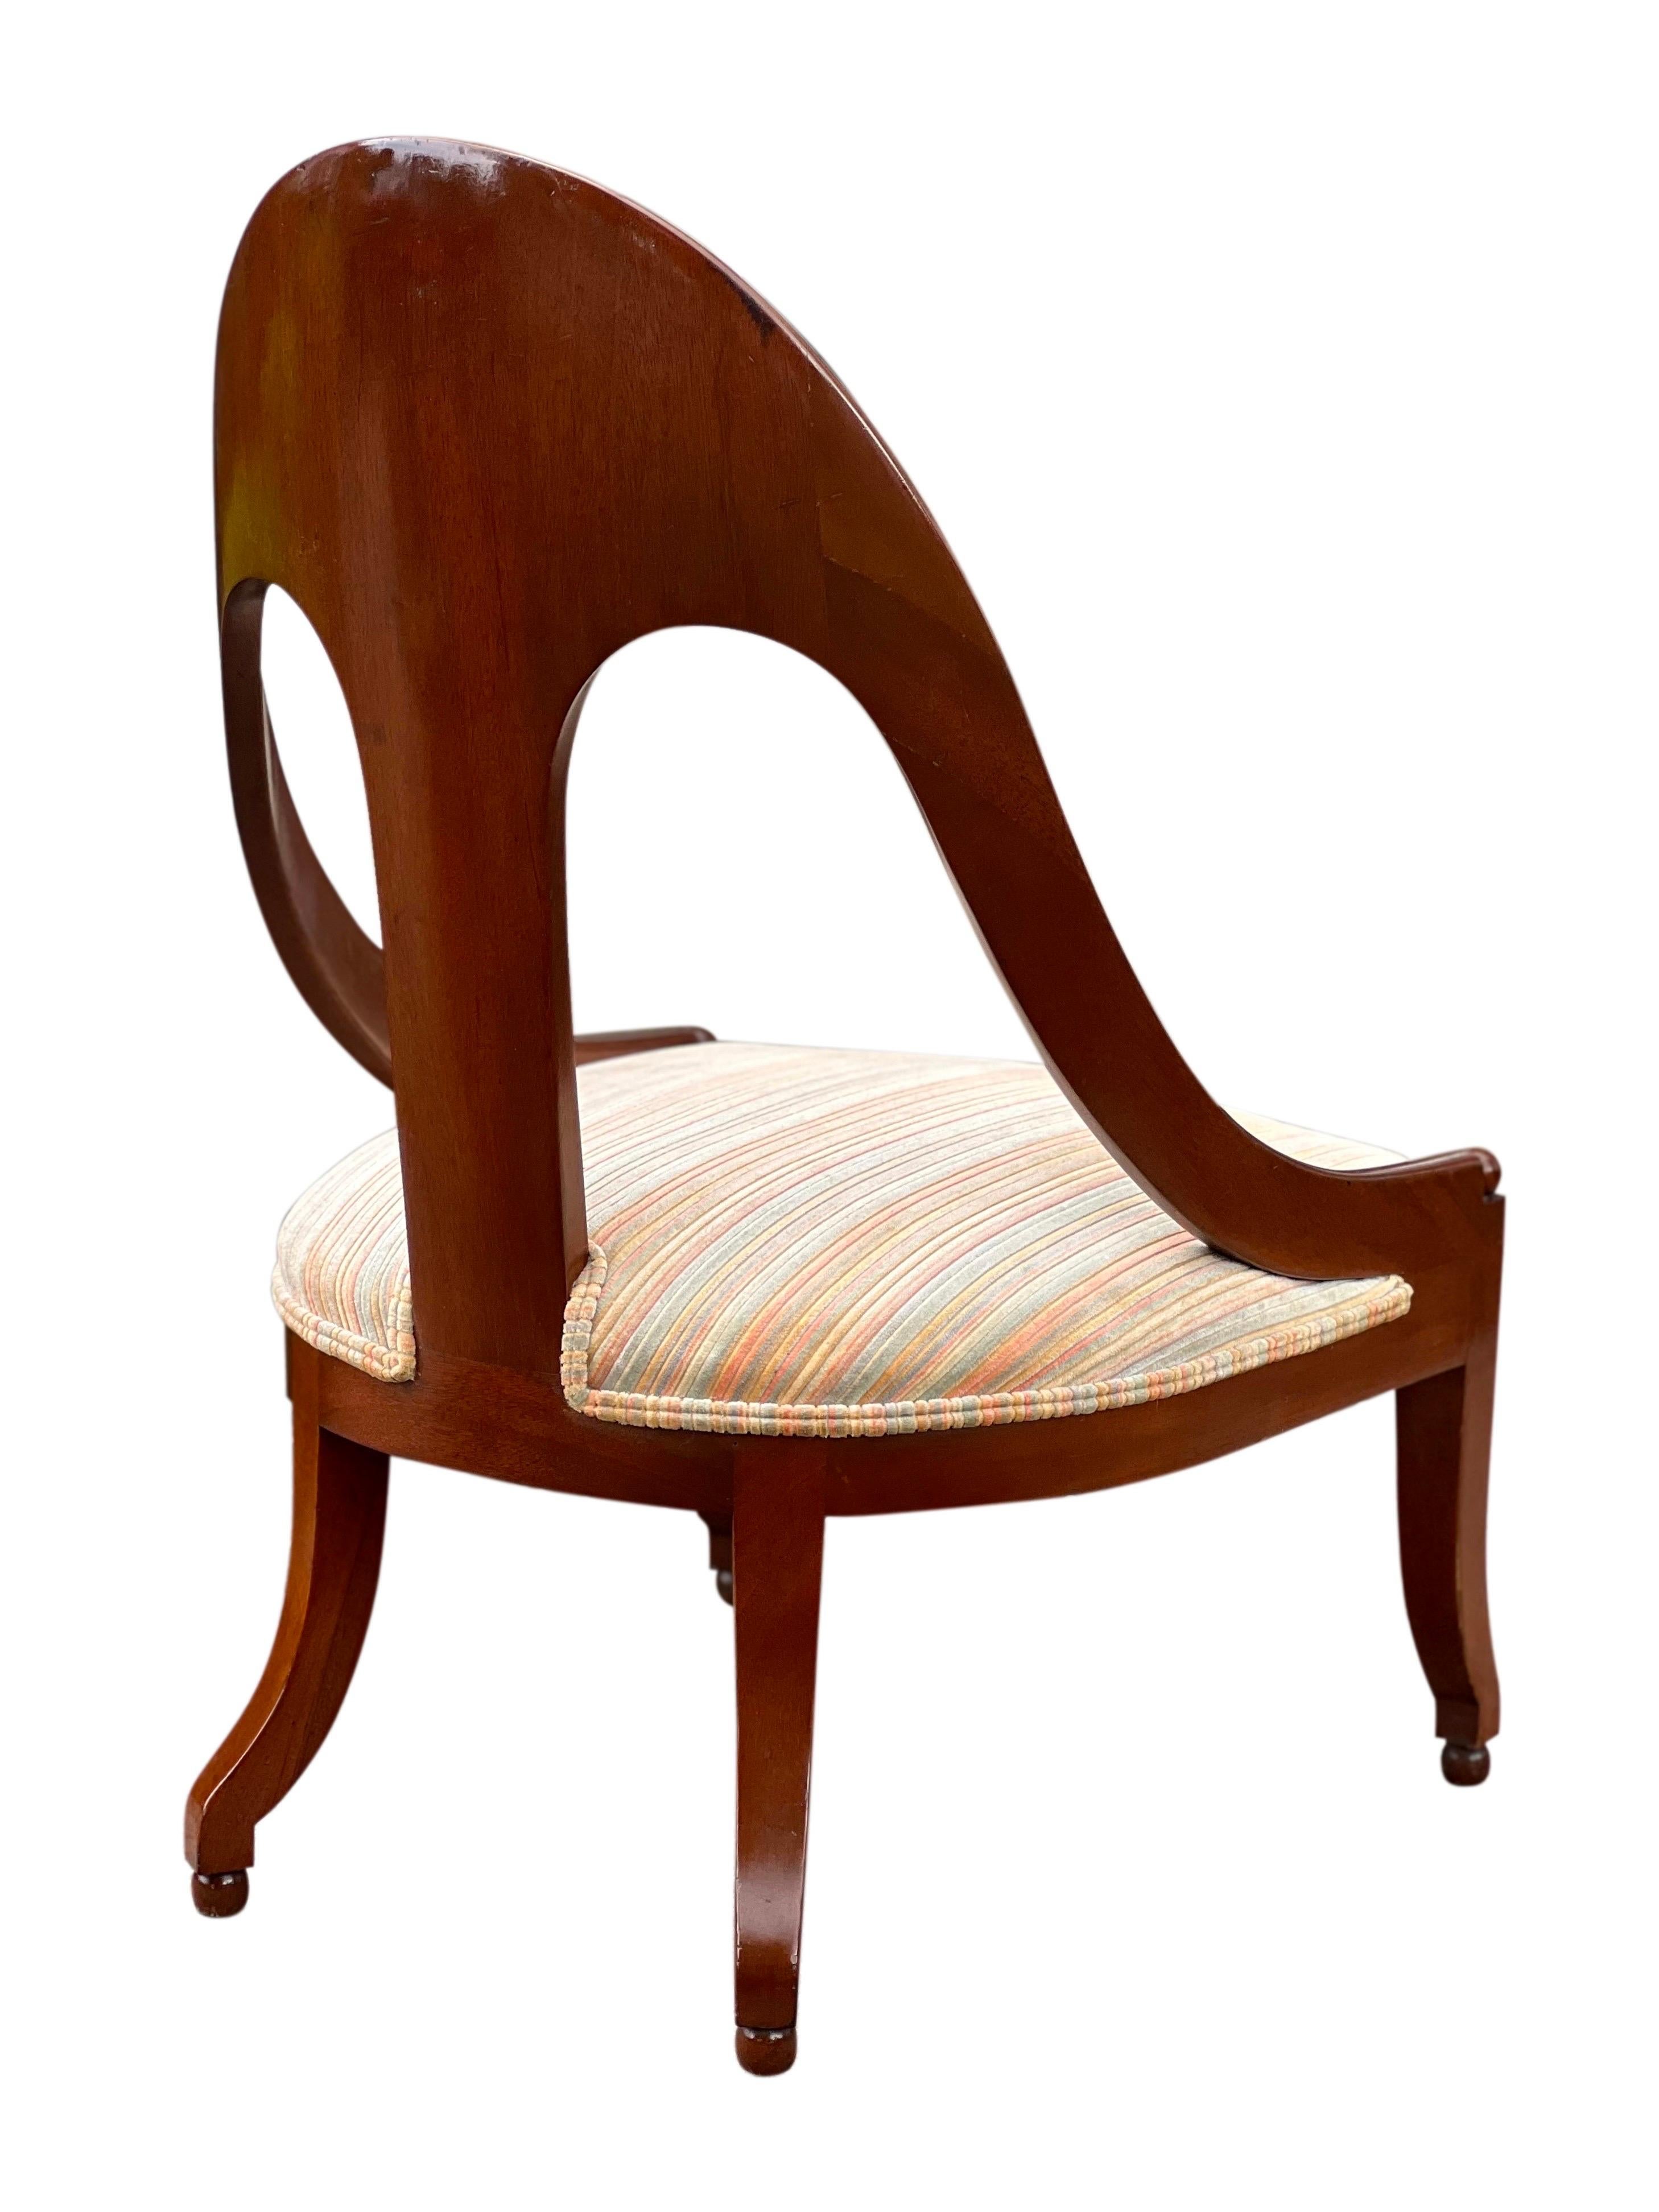 North American Mid Century Mahogany Slipper Lounge Chair Attributed to Michael Taylor for Baker For Sale